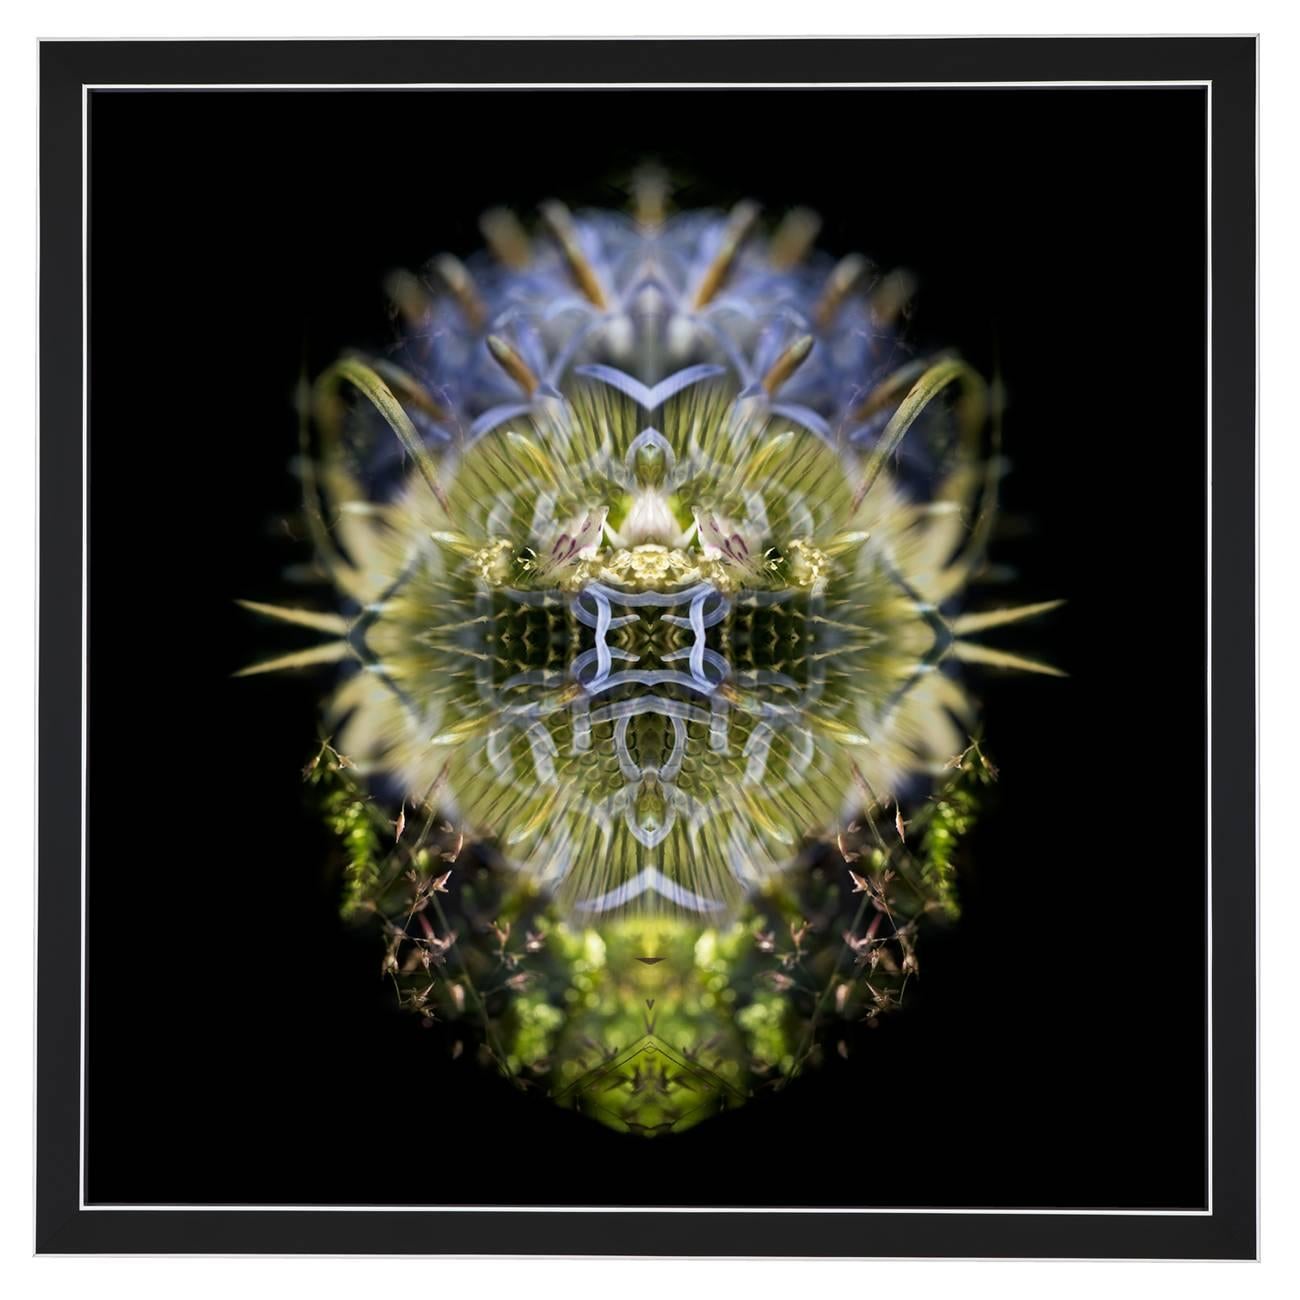 Composition: 
Dipsacus (teasel), Echinops (globe thistle), Ulmaria (meadowsweet), Common spotted orchid, Moss, Grass seed

Limited edition. Each image is uniquely printed directly to 5mm acrylic glass using UV cured pigment inks giving each